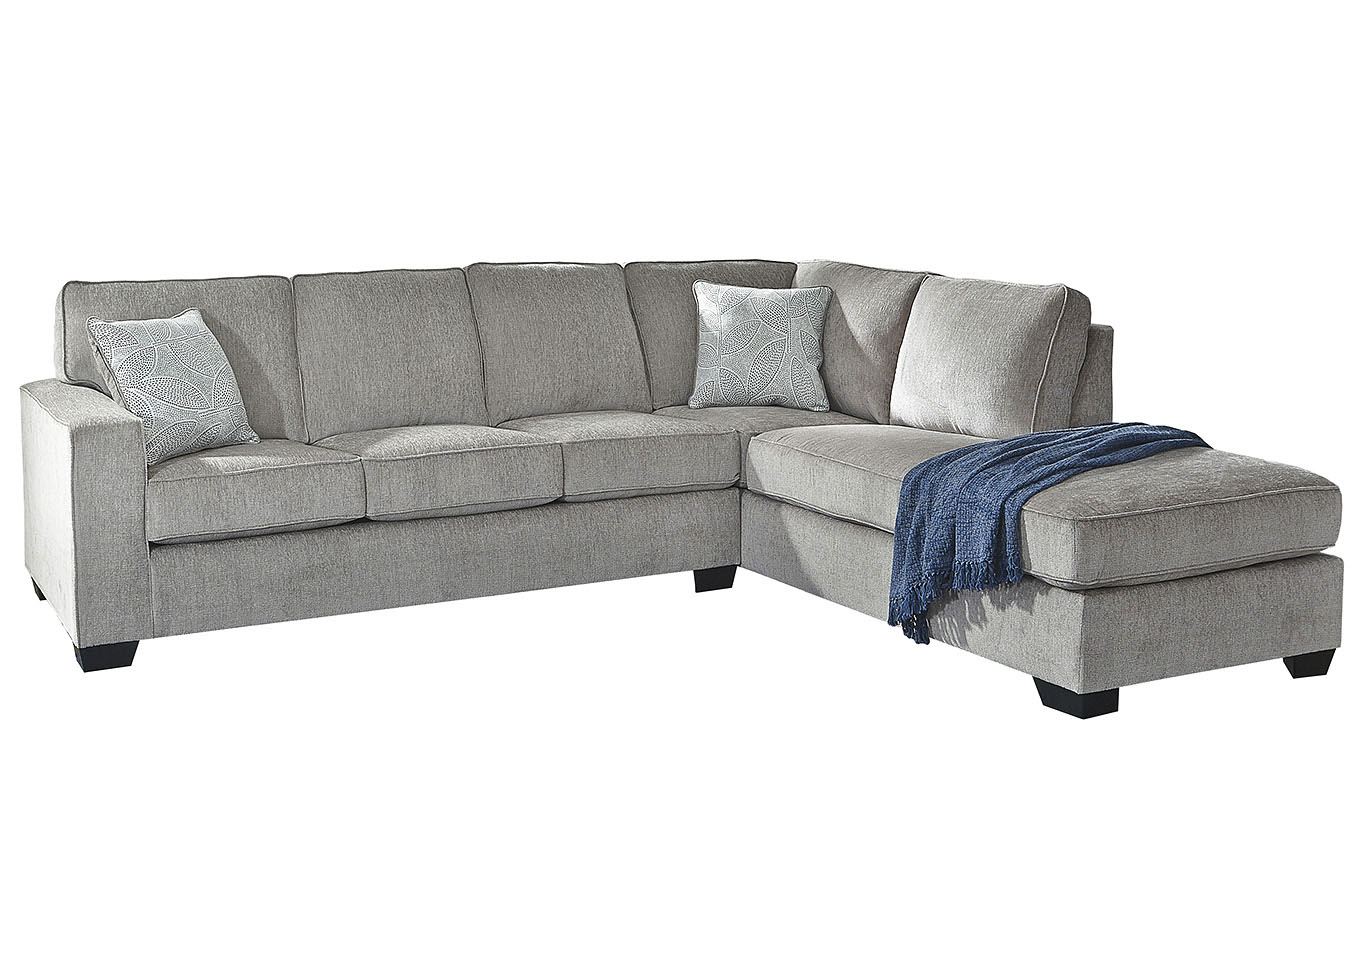 Altari Alloy Left-Arm Facing Chaise Sectional